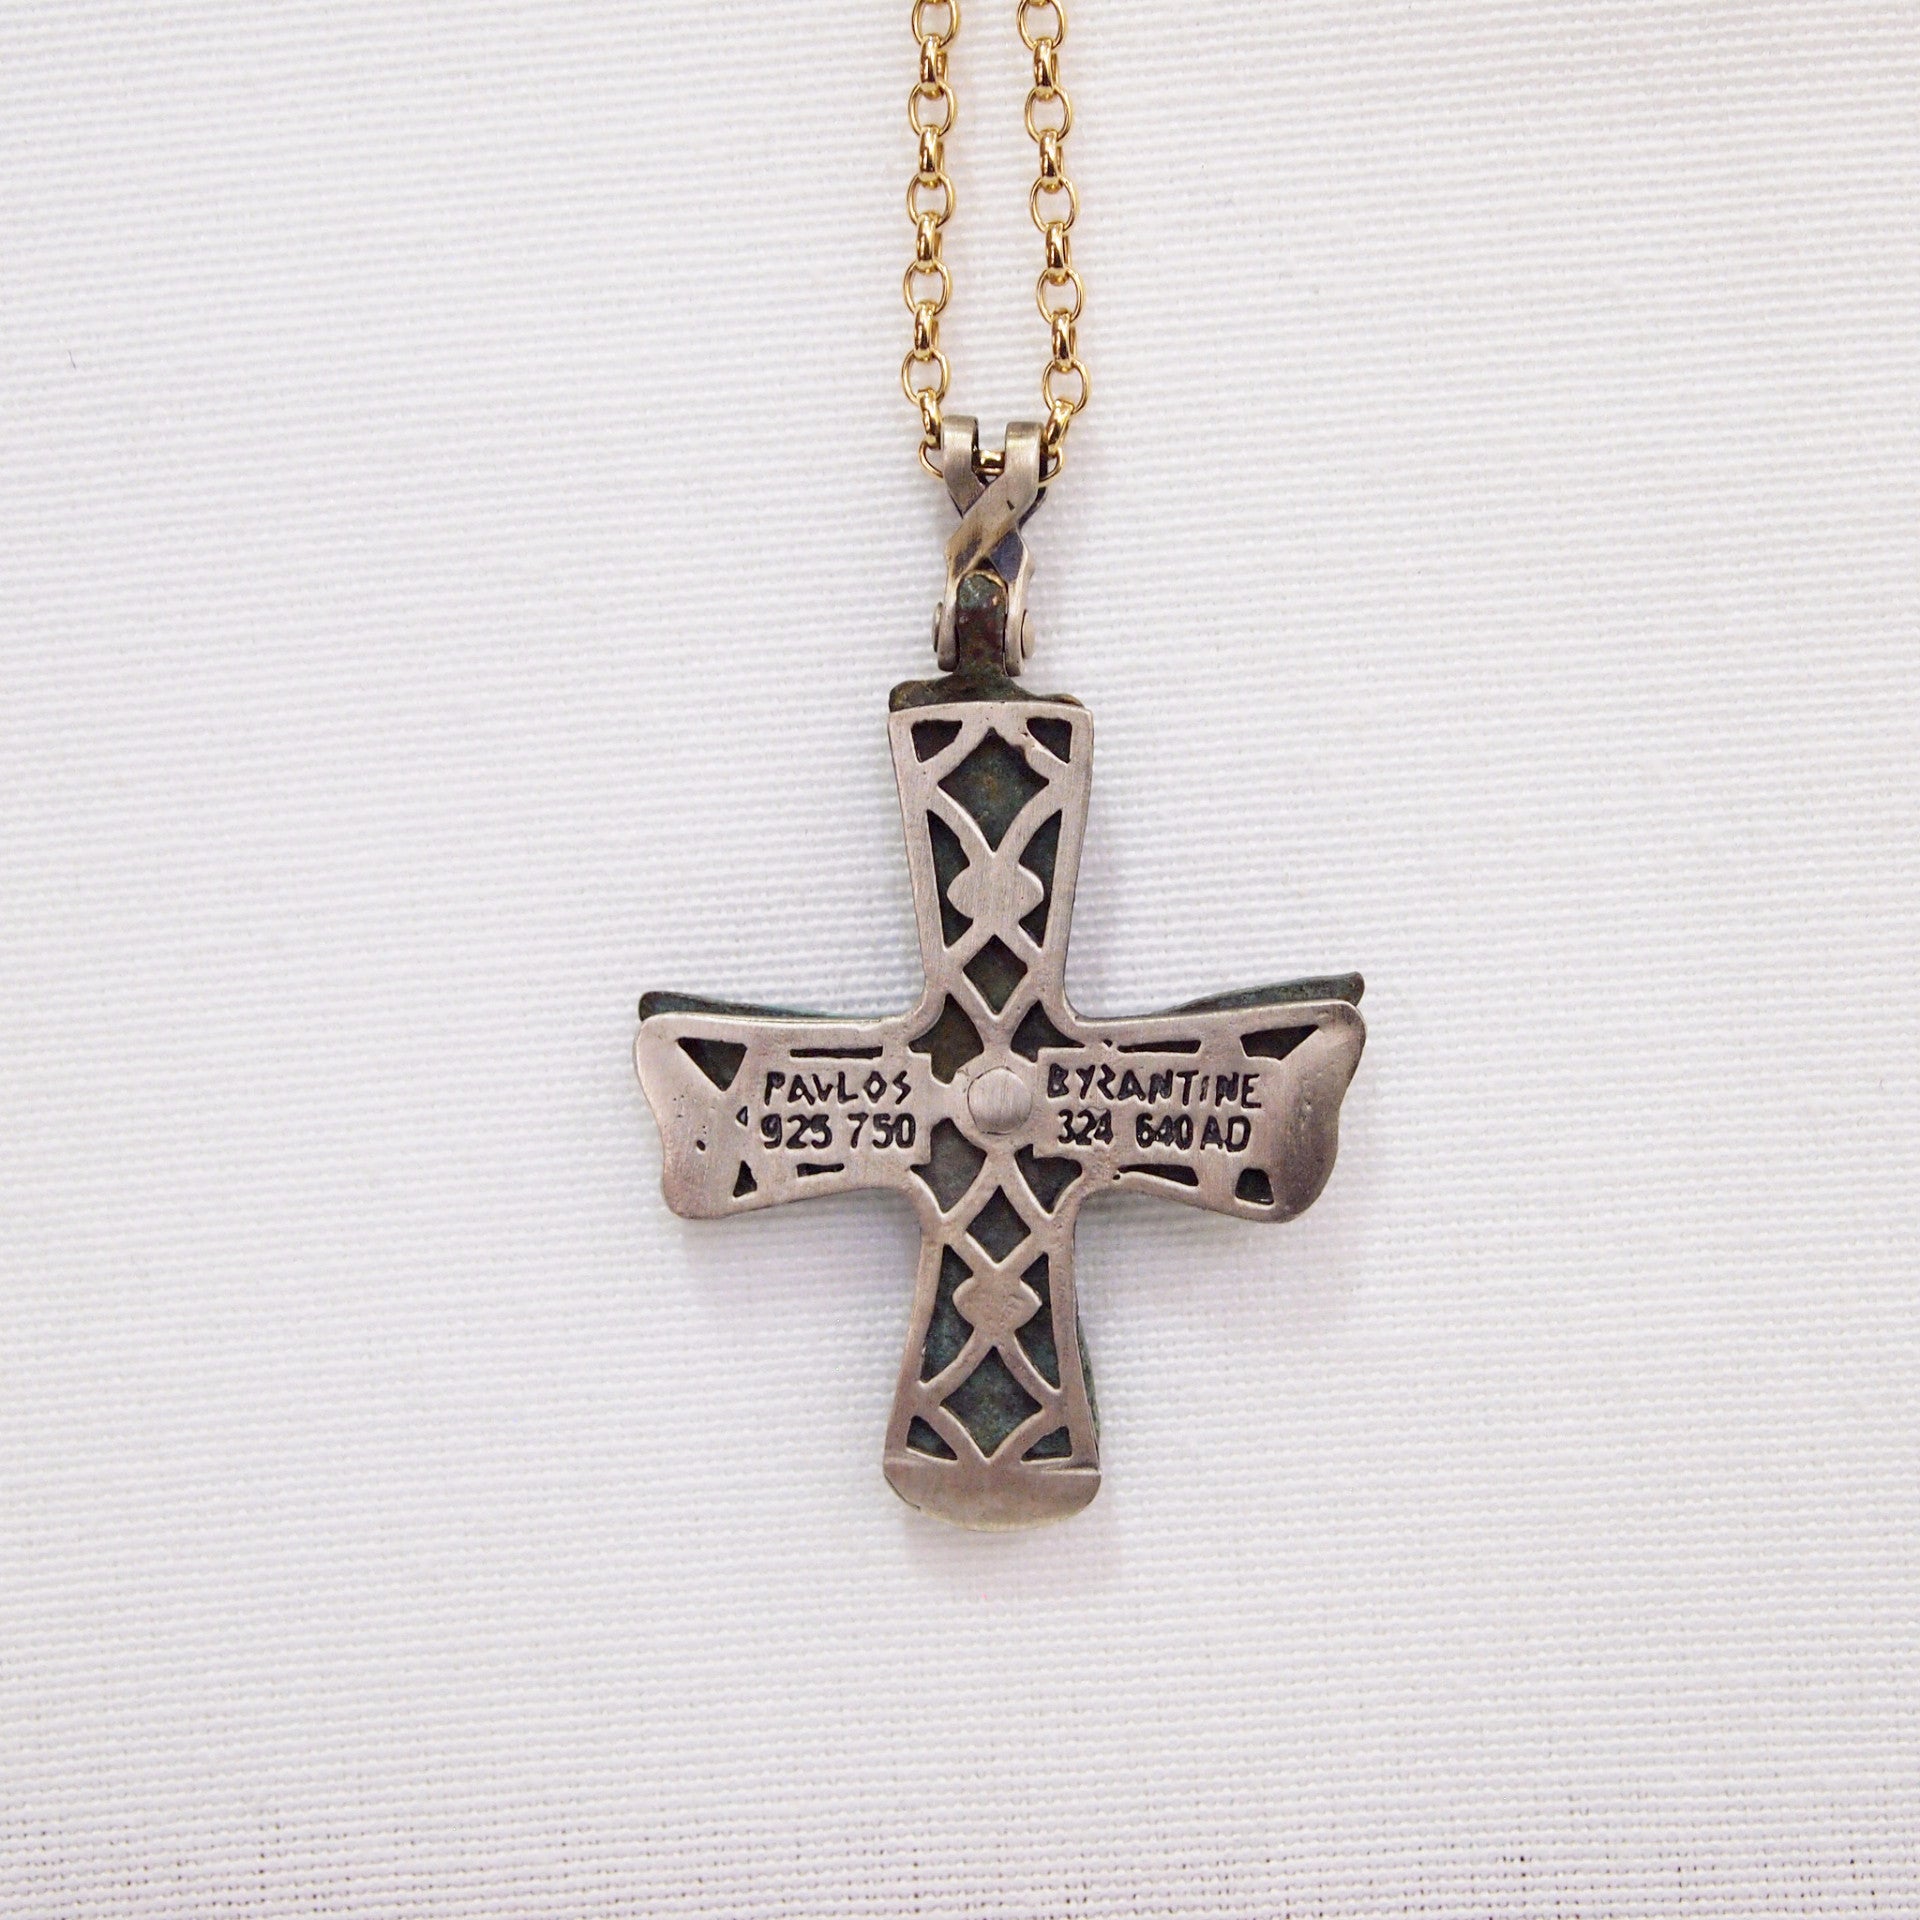 Byzantine Period Bronze Cross Pendant Encrusted In Yellow Gold And Sterling Silver